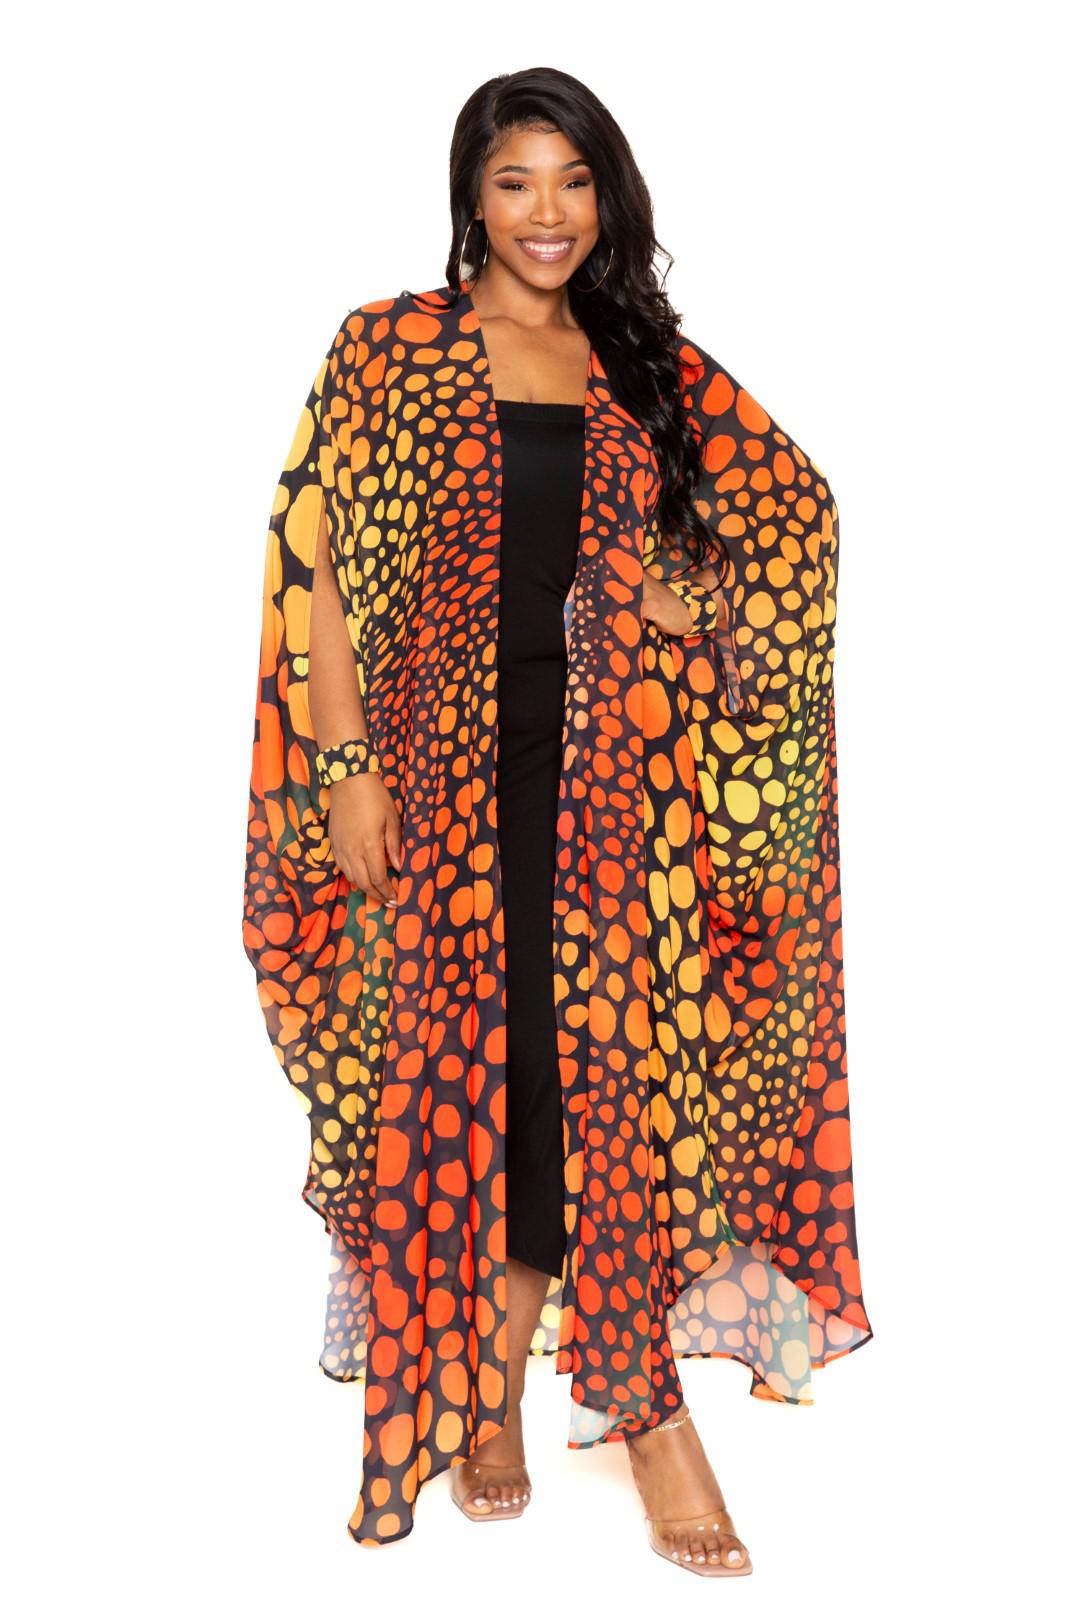 Dot Robe With Wrist Band Blue Zone Planet